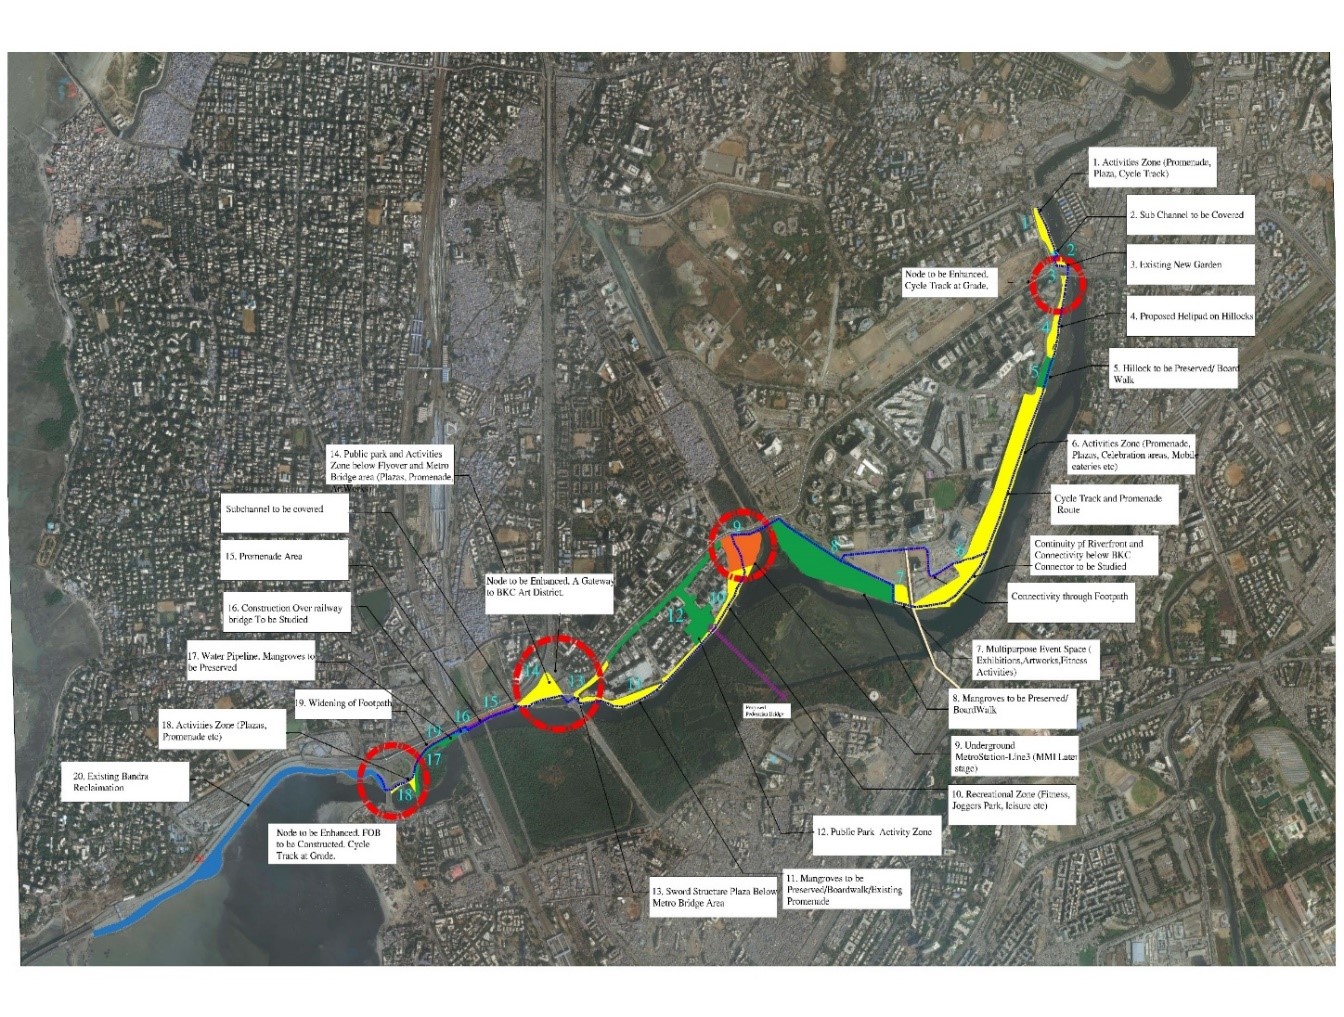 Visionary Plan for the Mithi Riverfront Development